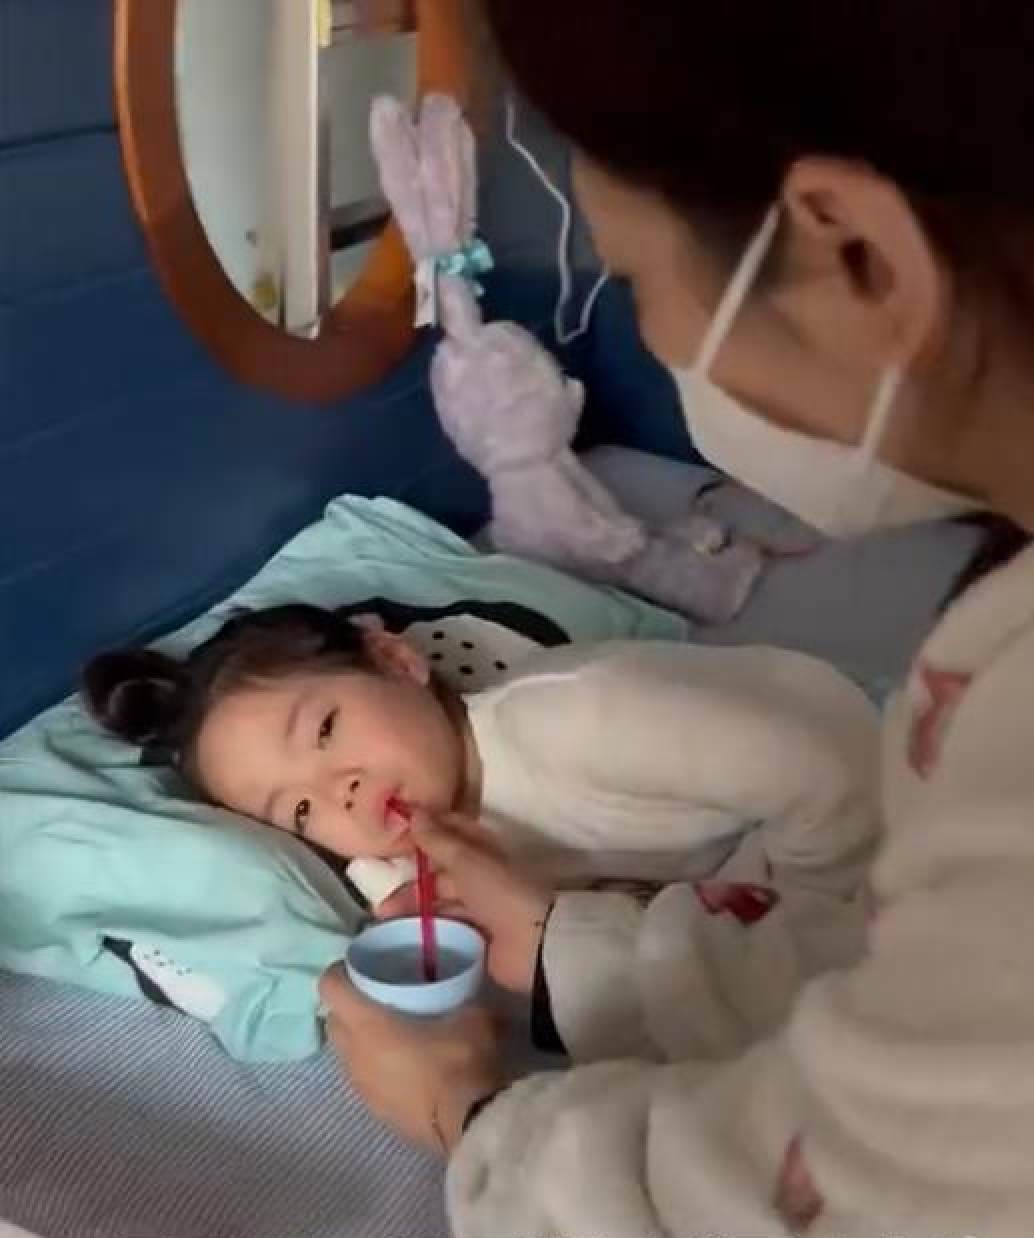 One of Yang’s twin daughters gets ready to take a nap. Some online observers have criticised the former Olympian’s decision to home-school his children. Photo: Douyin